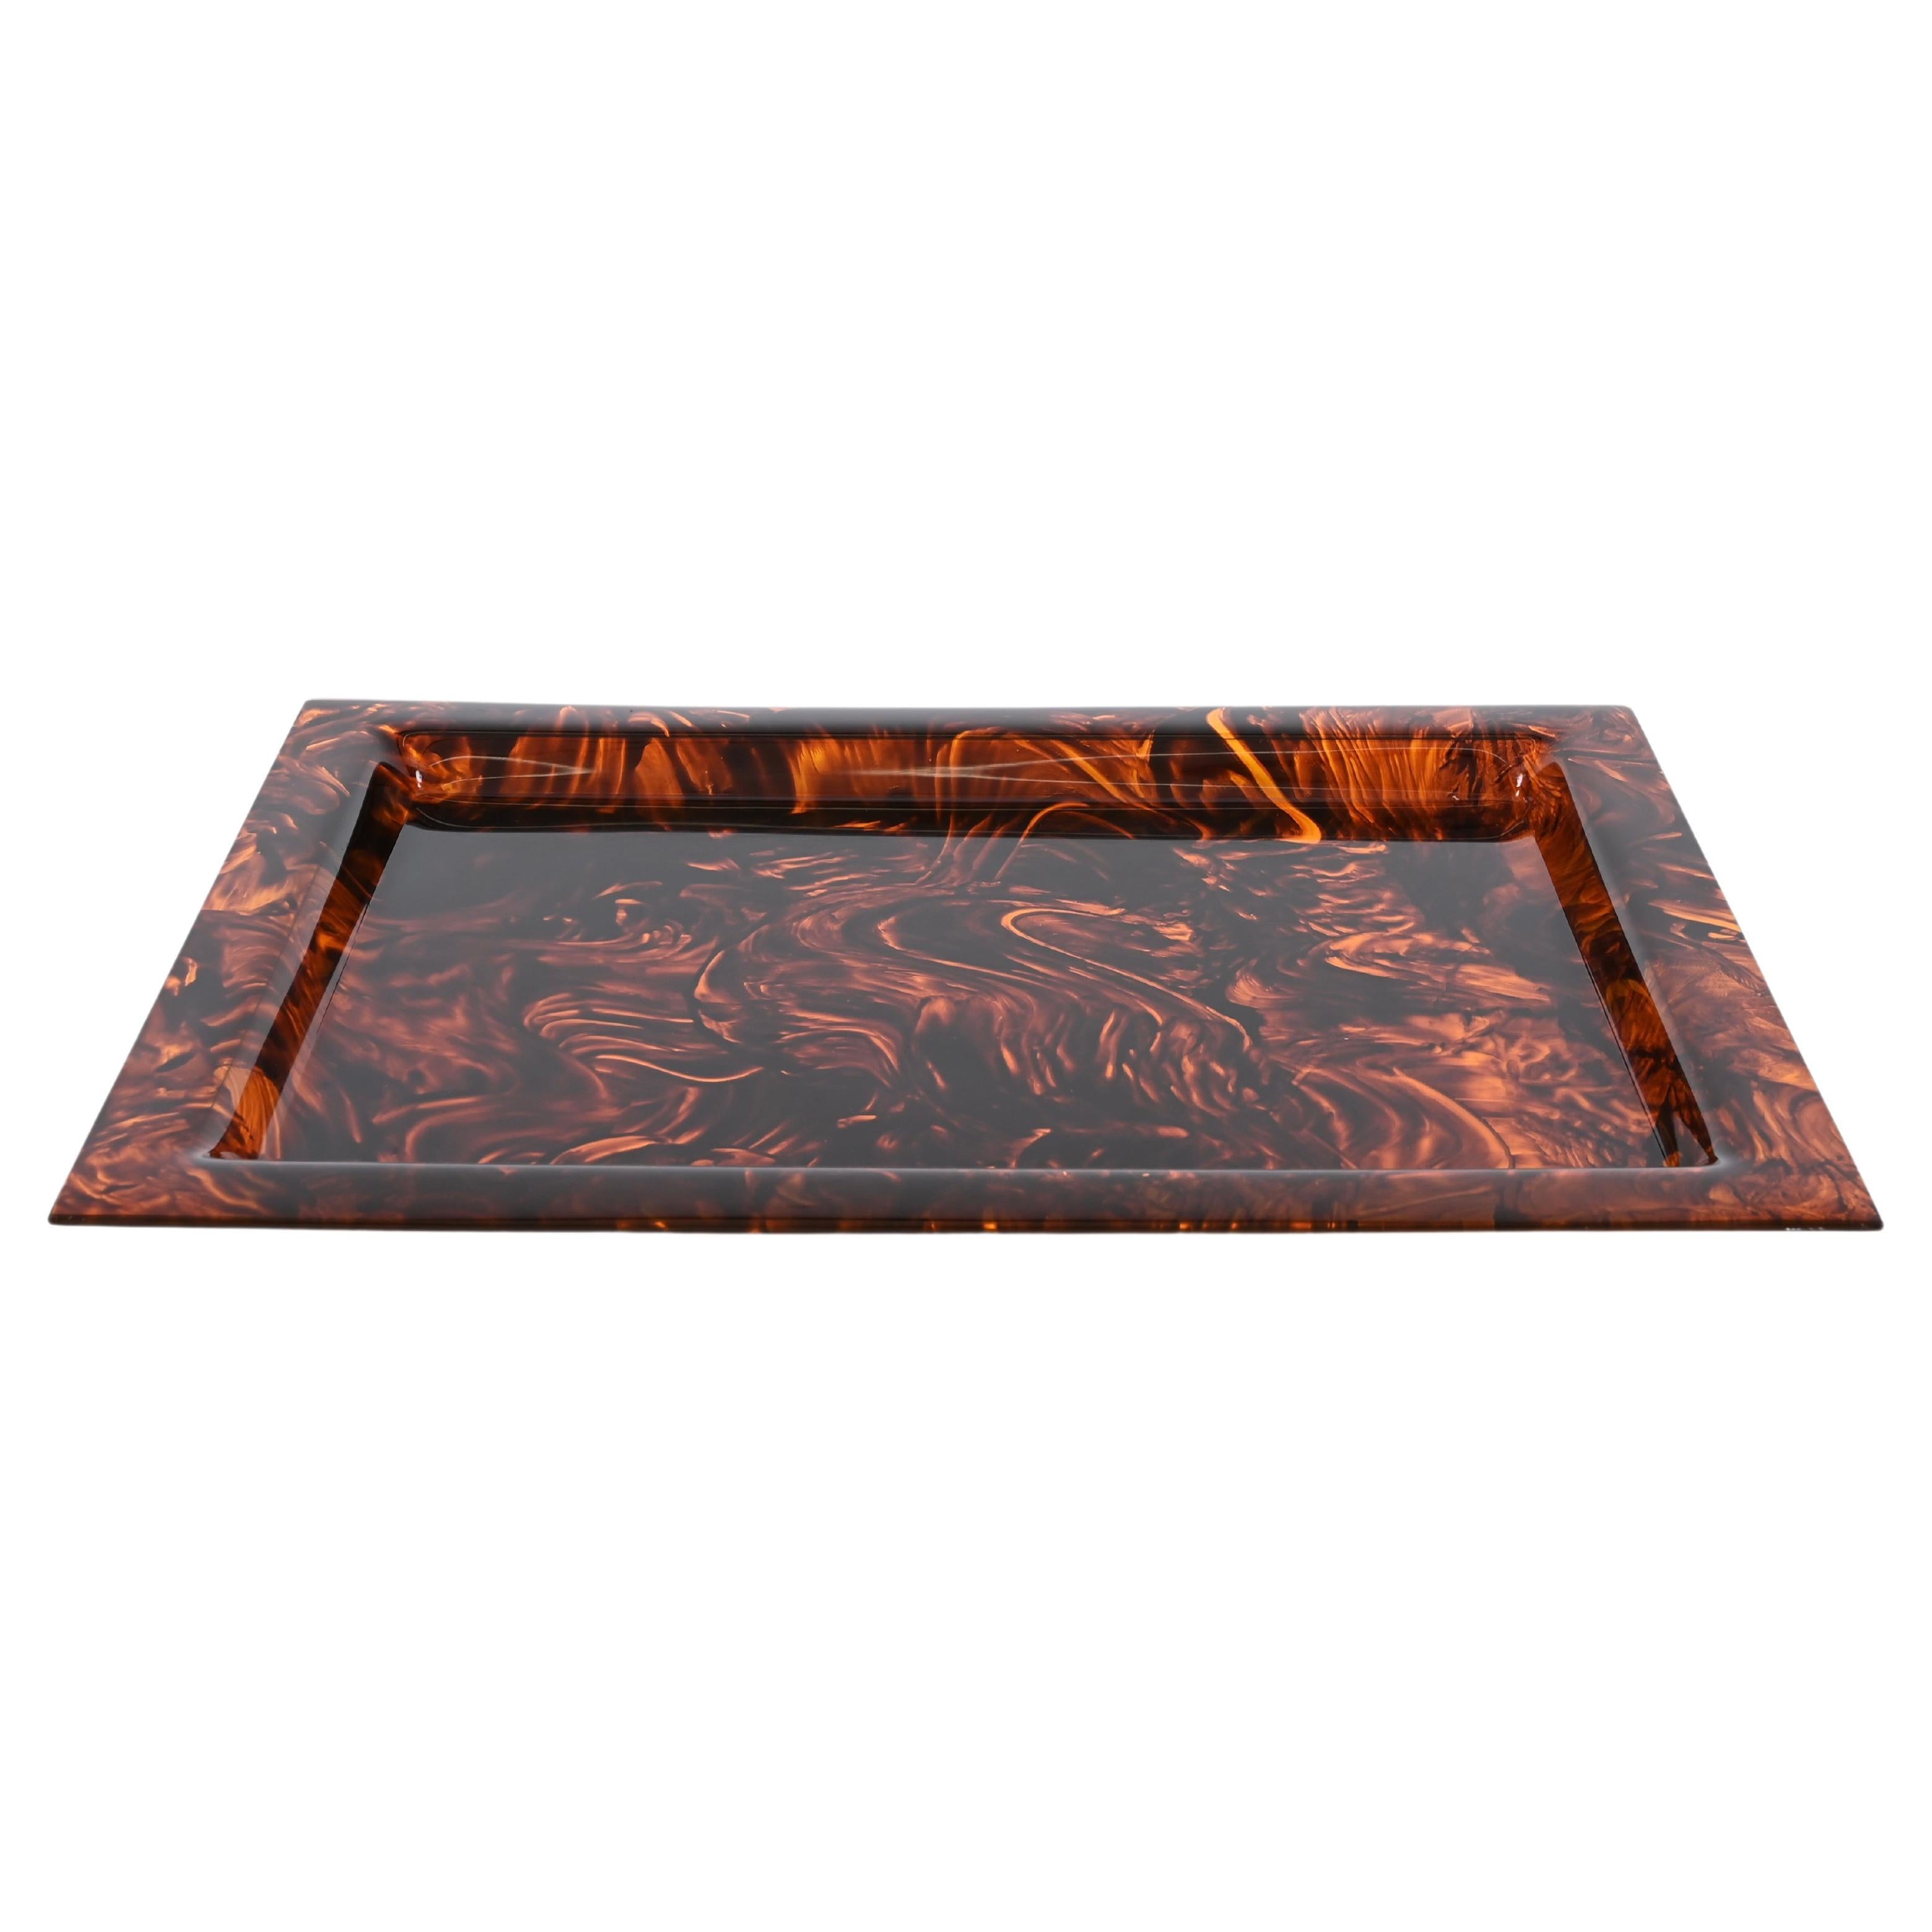 Christian Dior Tortoiseshell Effect Lucite Serving Tray, Italy 1970s